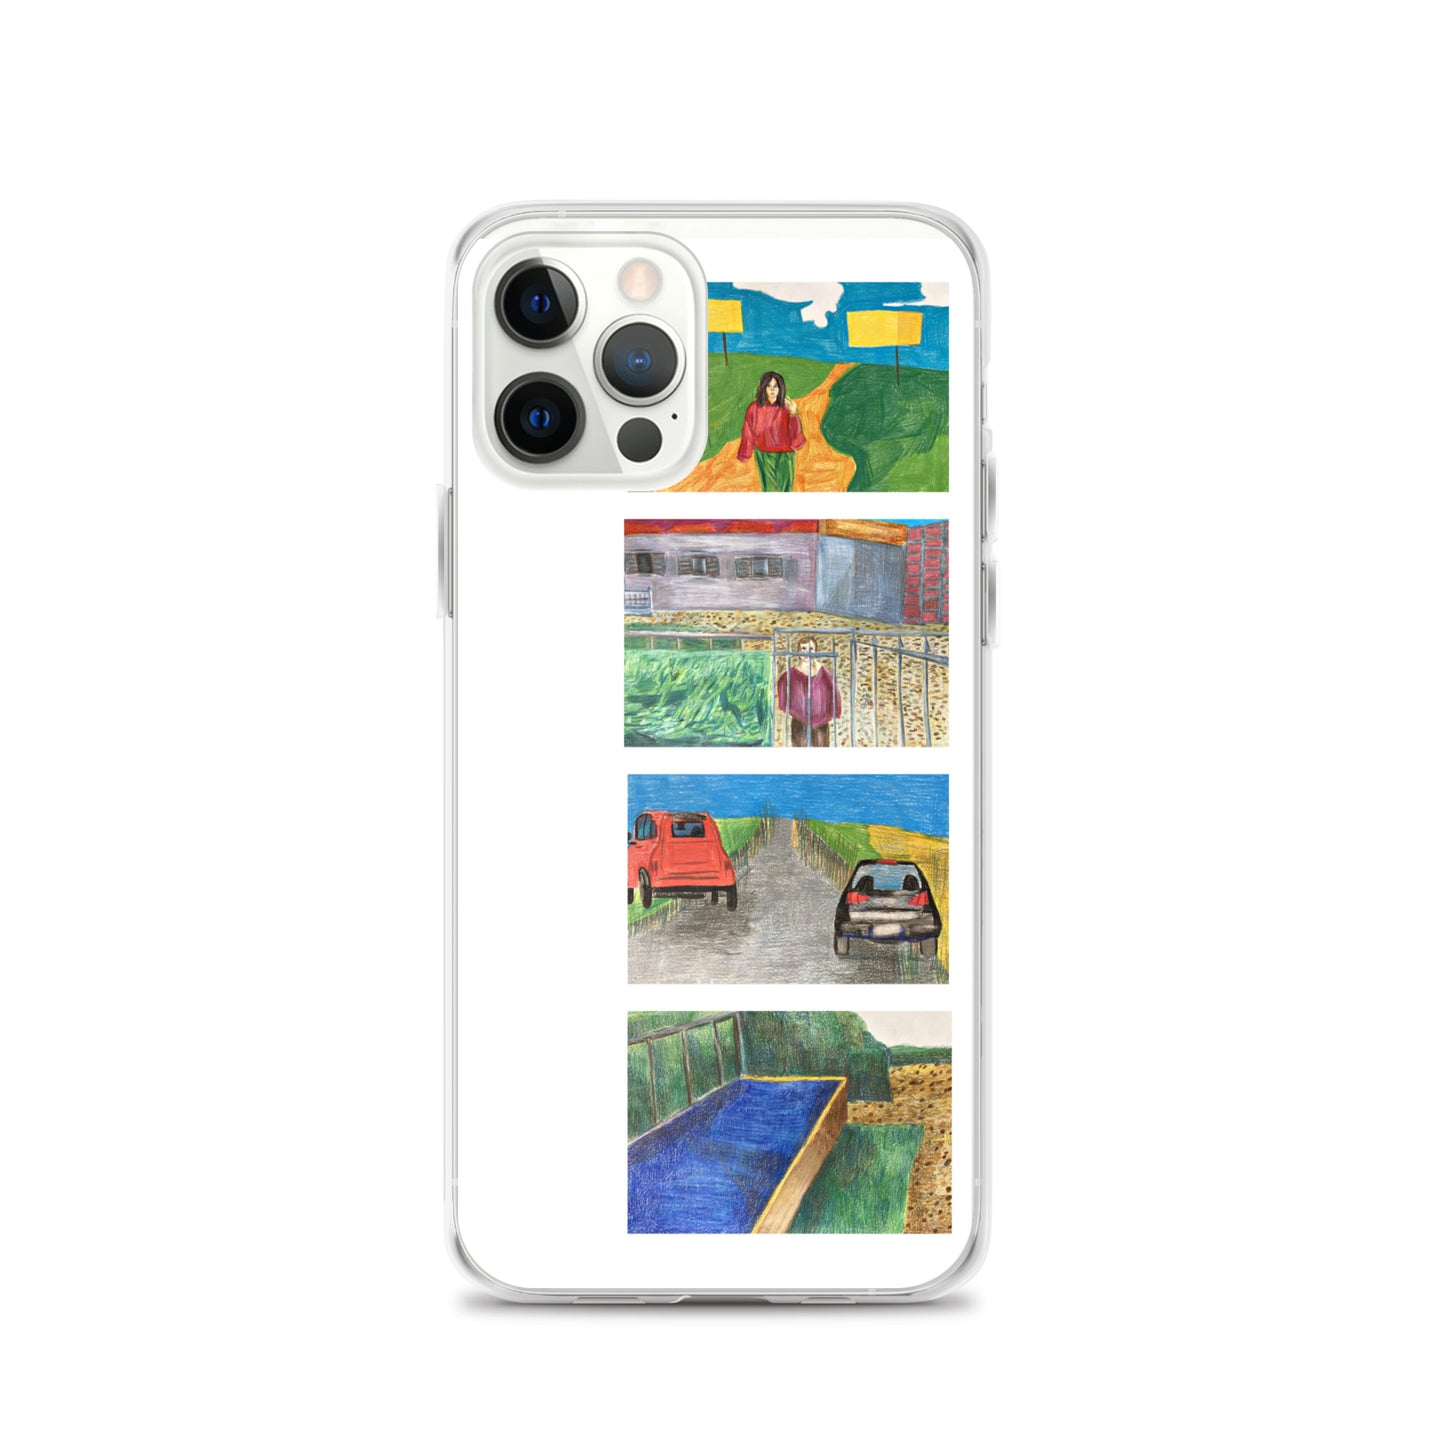 iPhone Case - In the Countryside